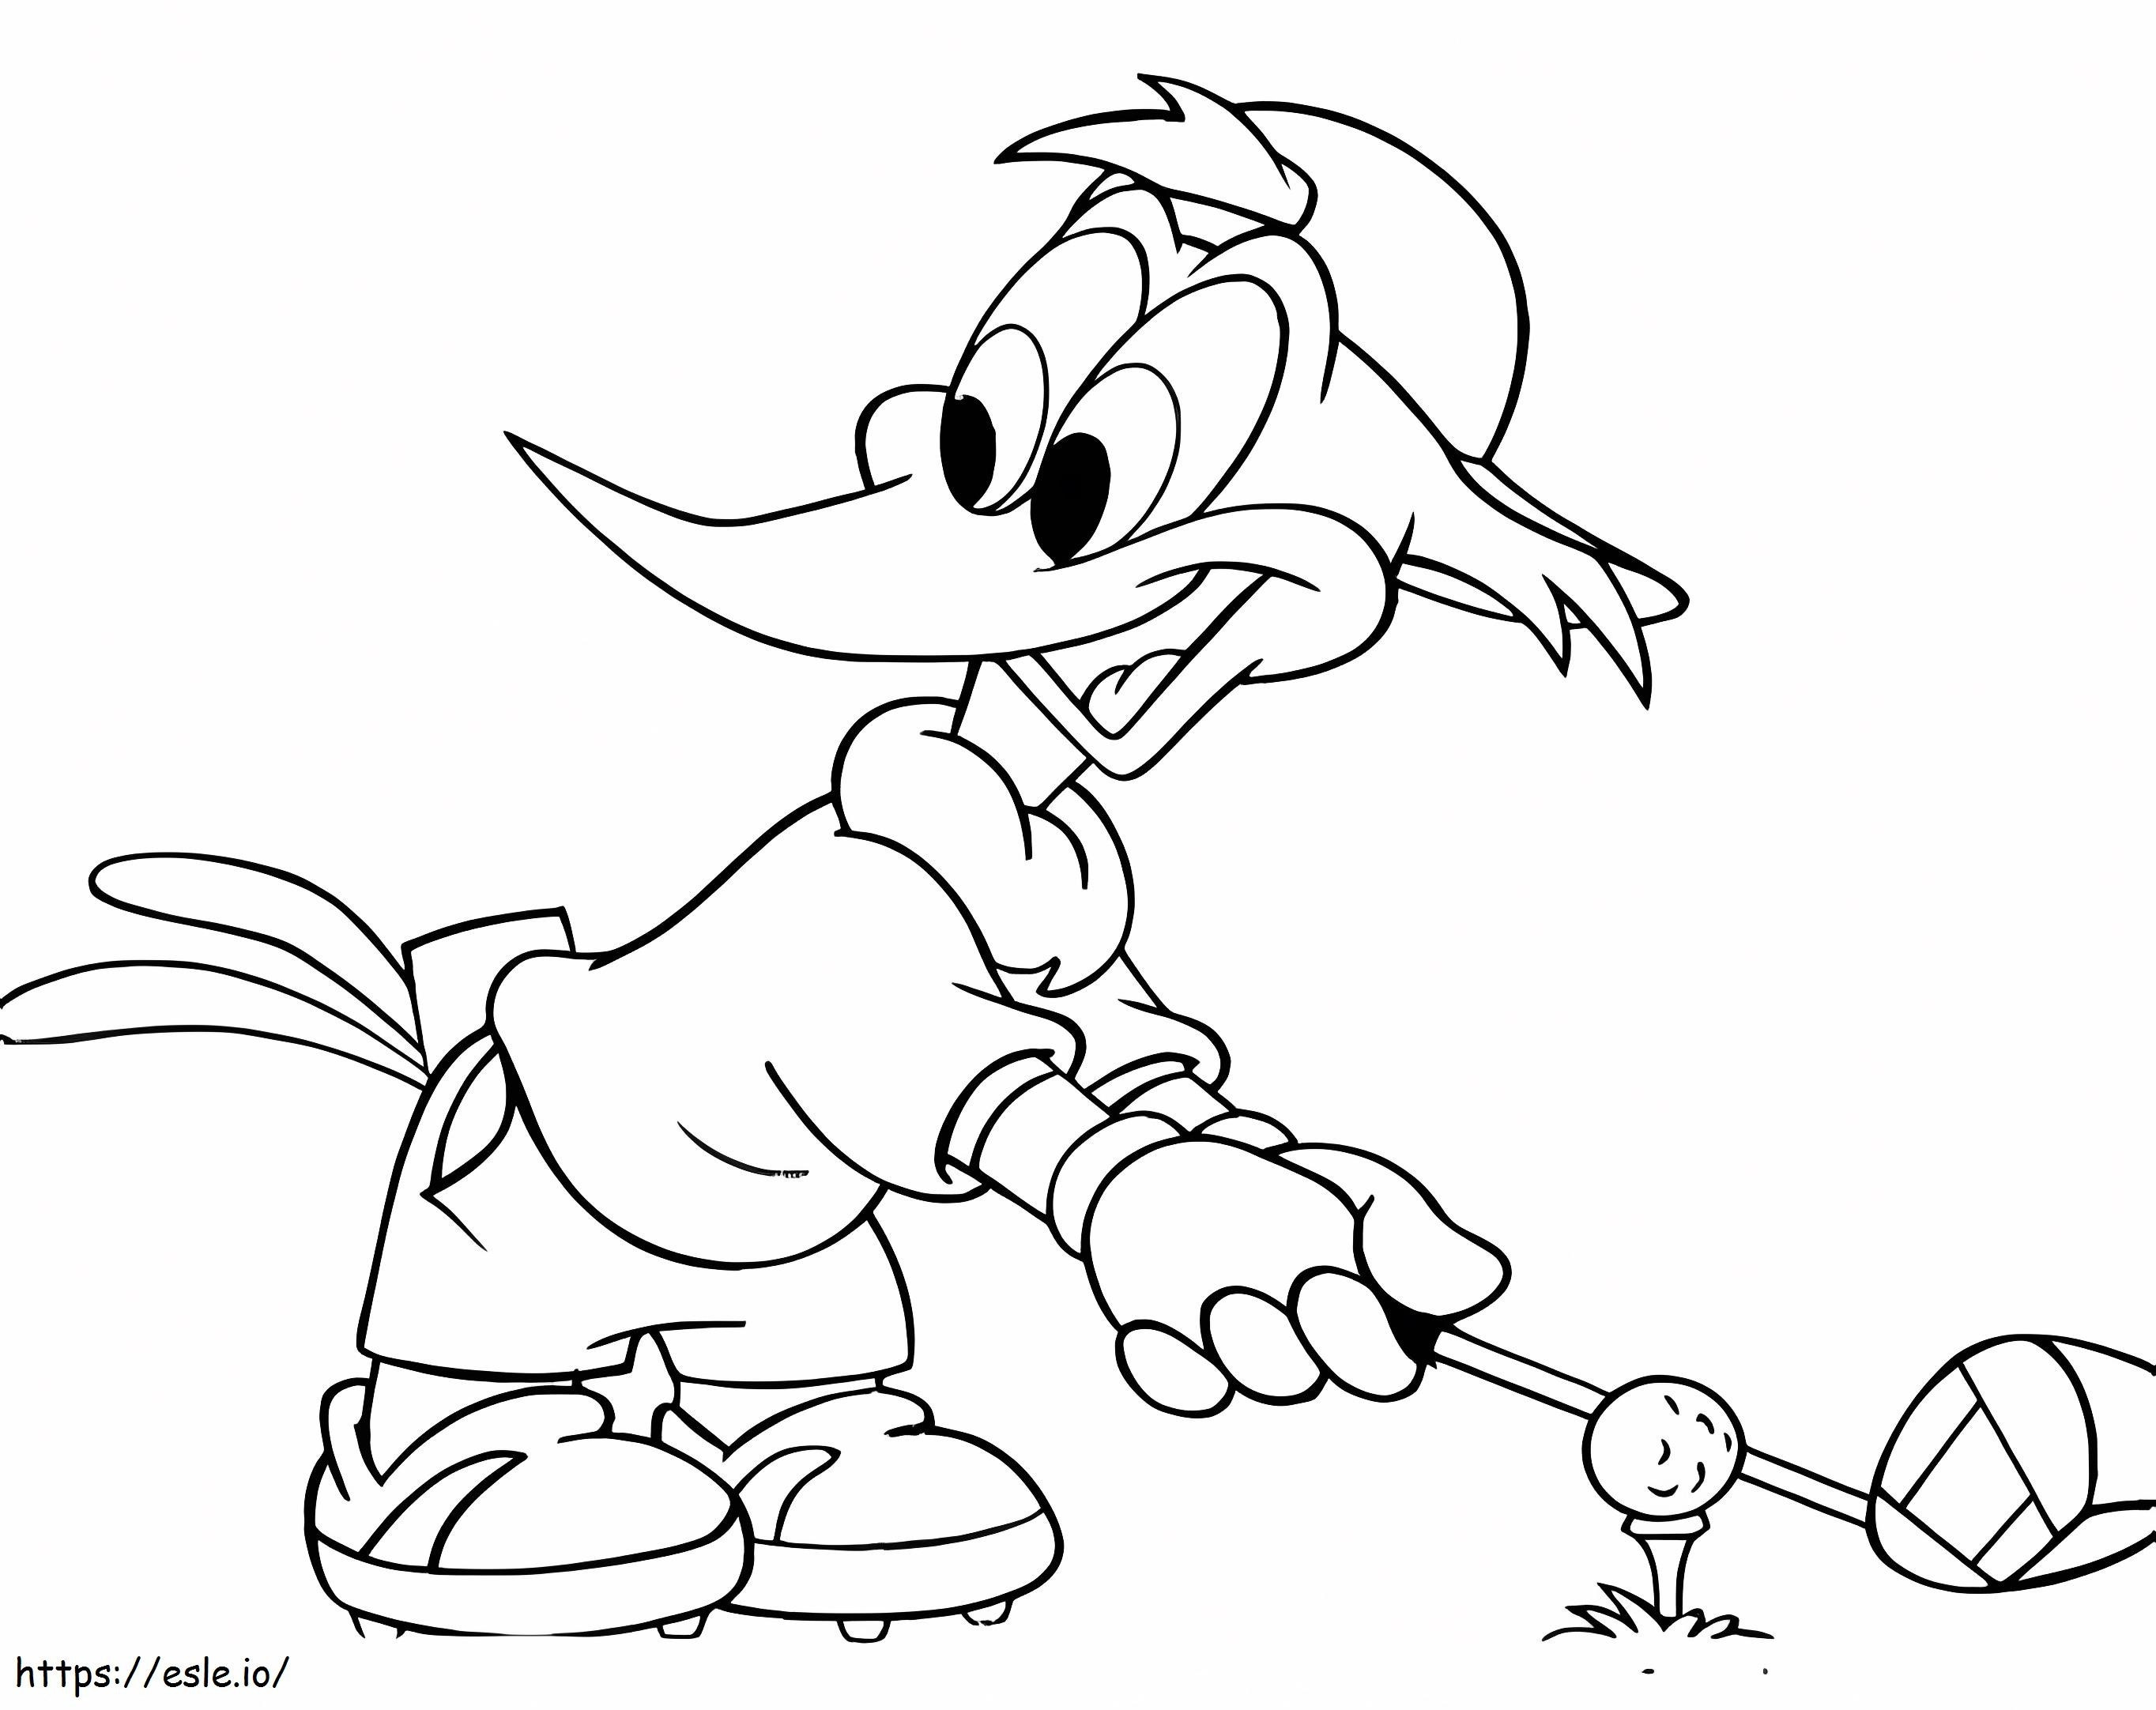 Woody Woodpecker Playing Golf coloring page